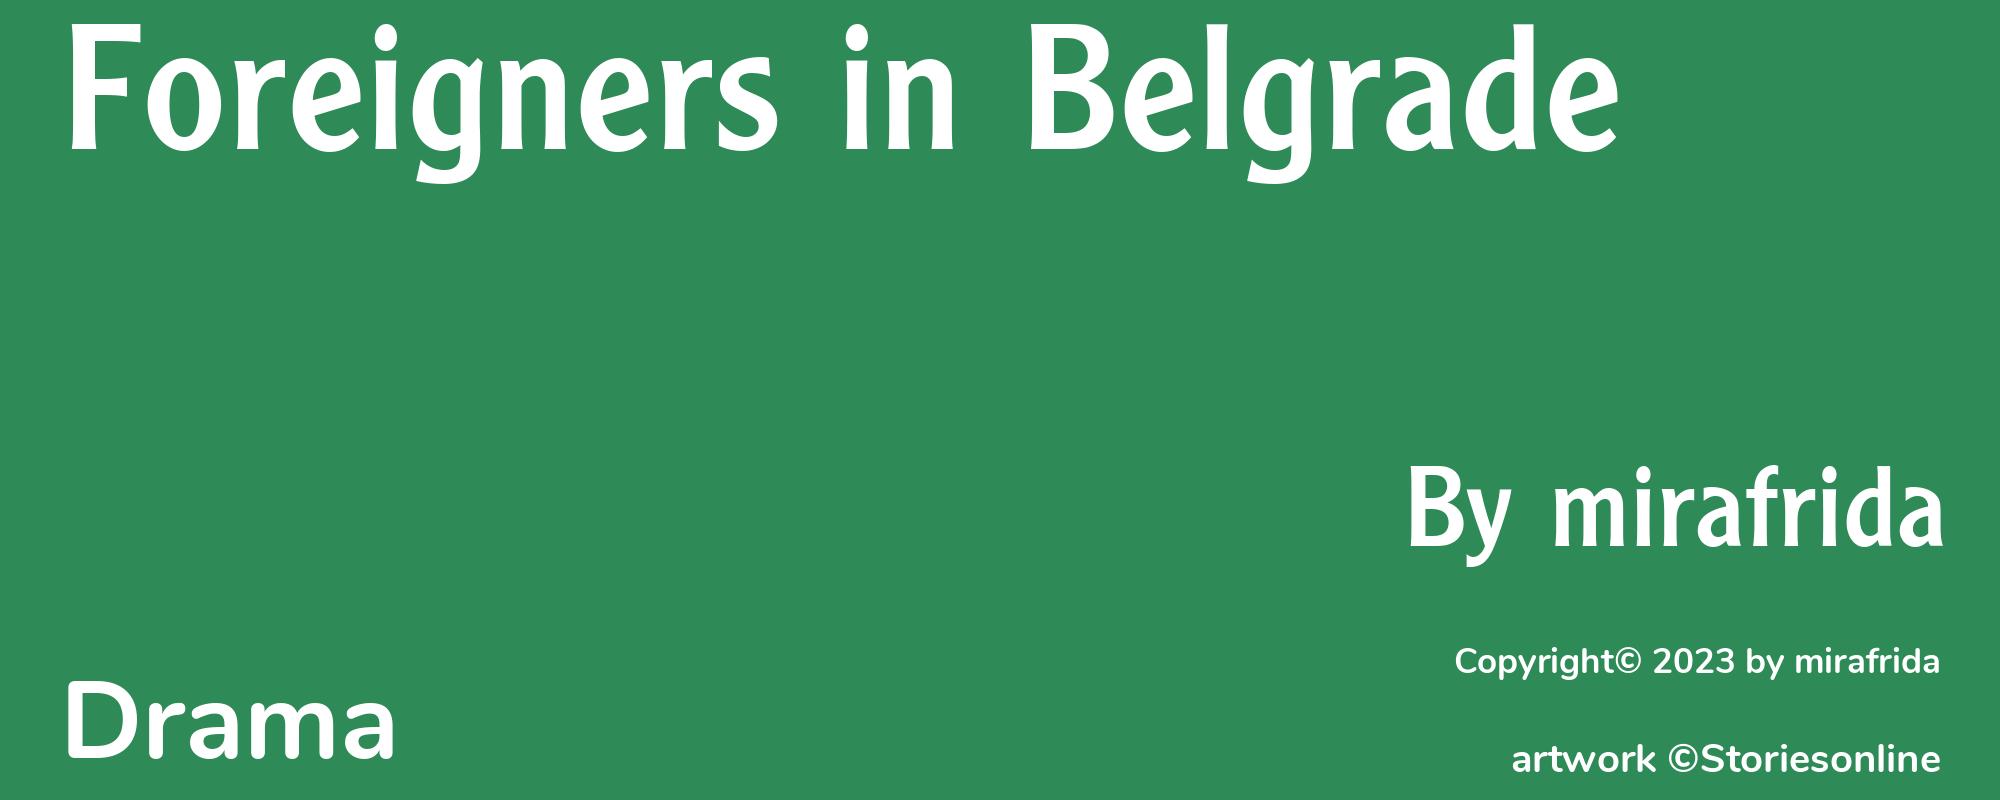 Foreigners in Belgrade - Cover